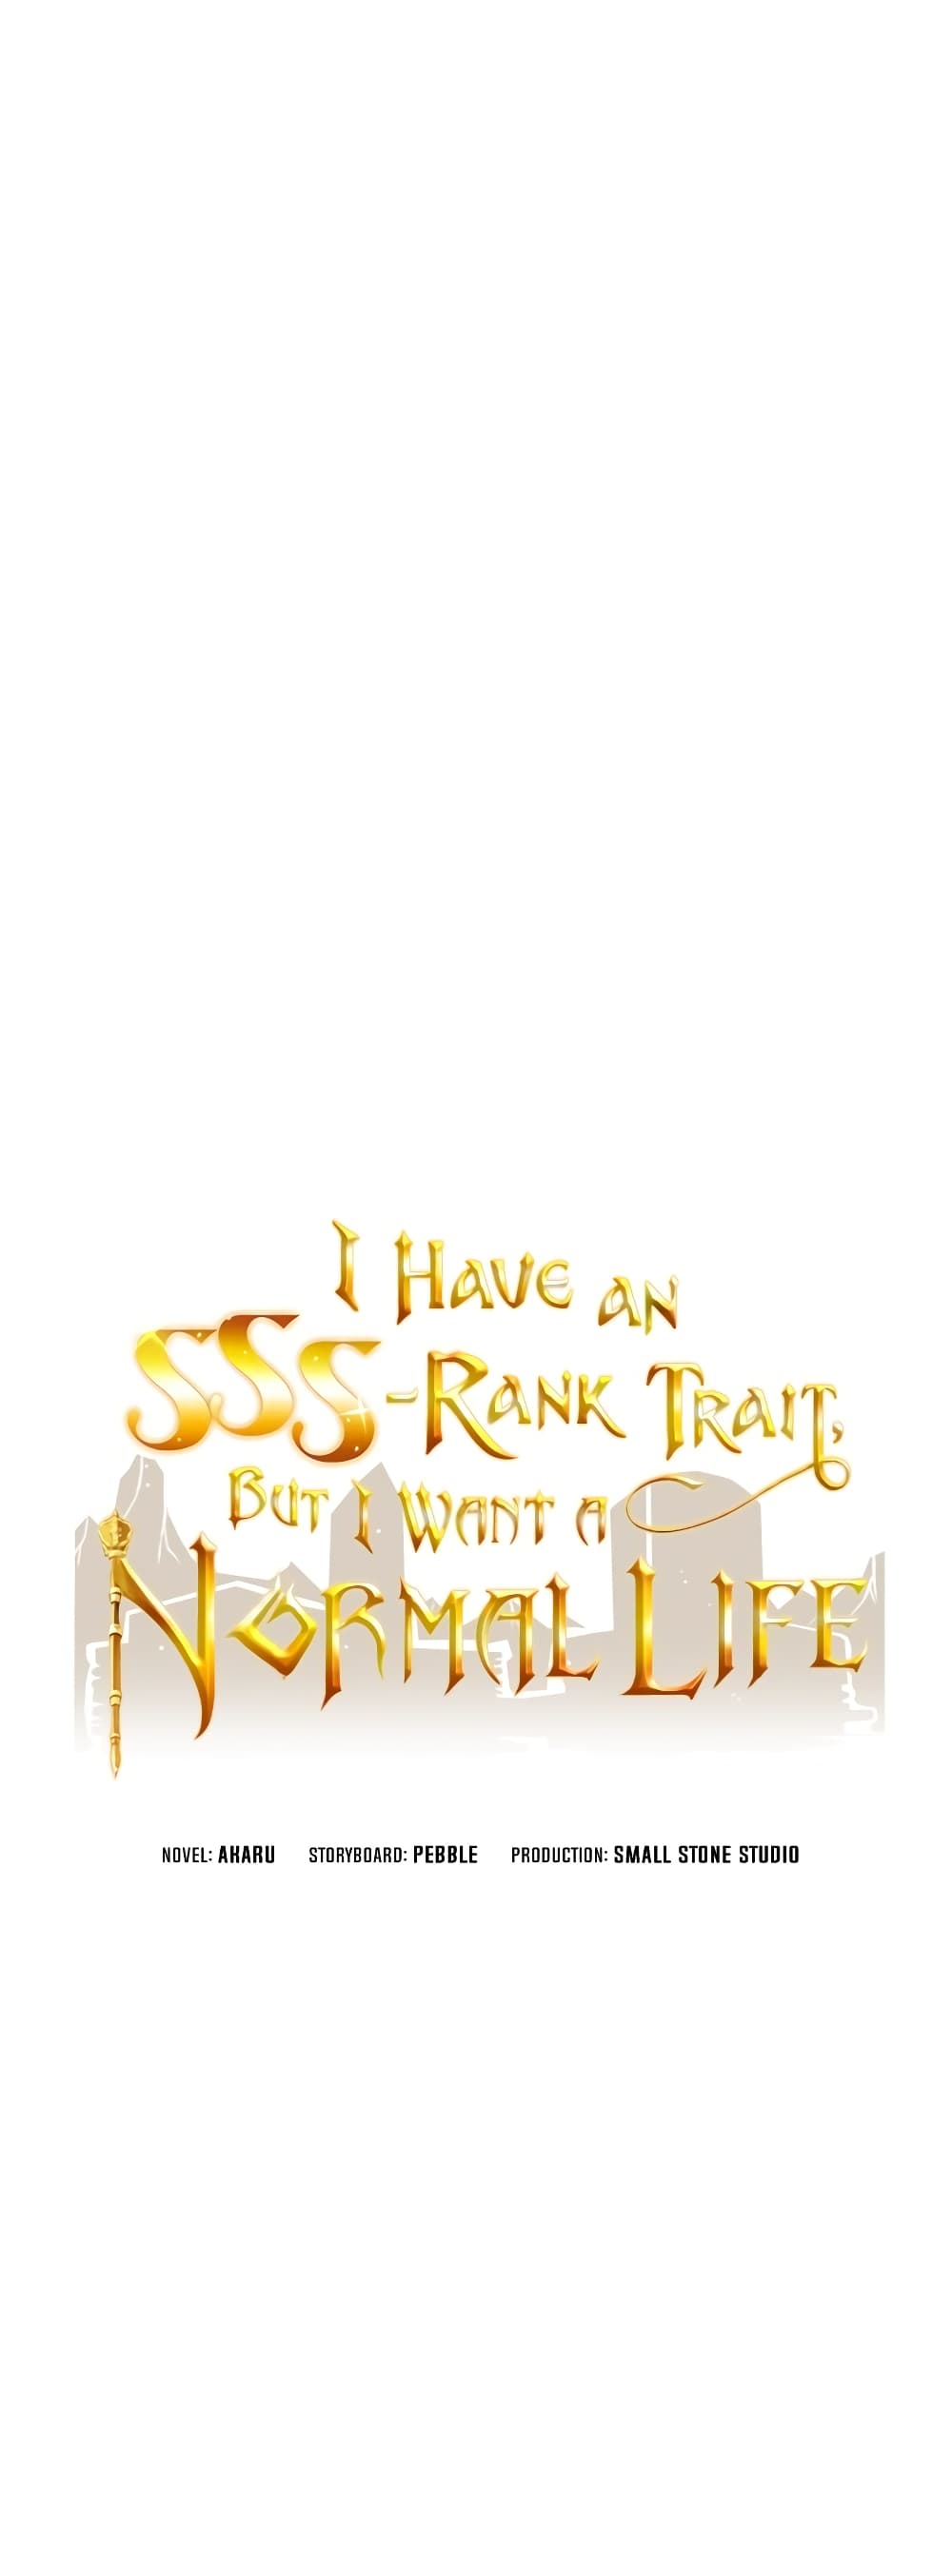 I Have an SSS-Rank Trait, But I Want a Normal Life 31-31